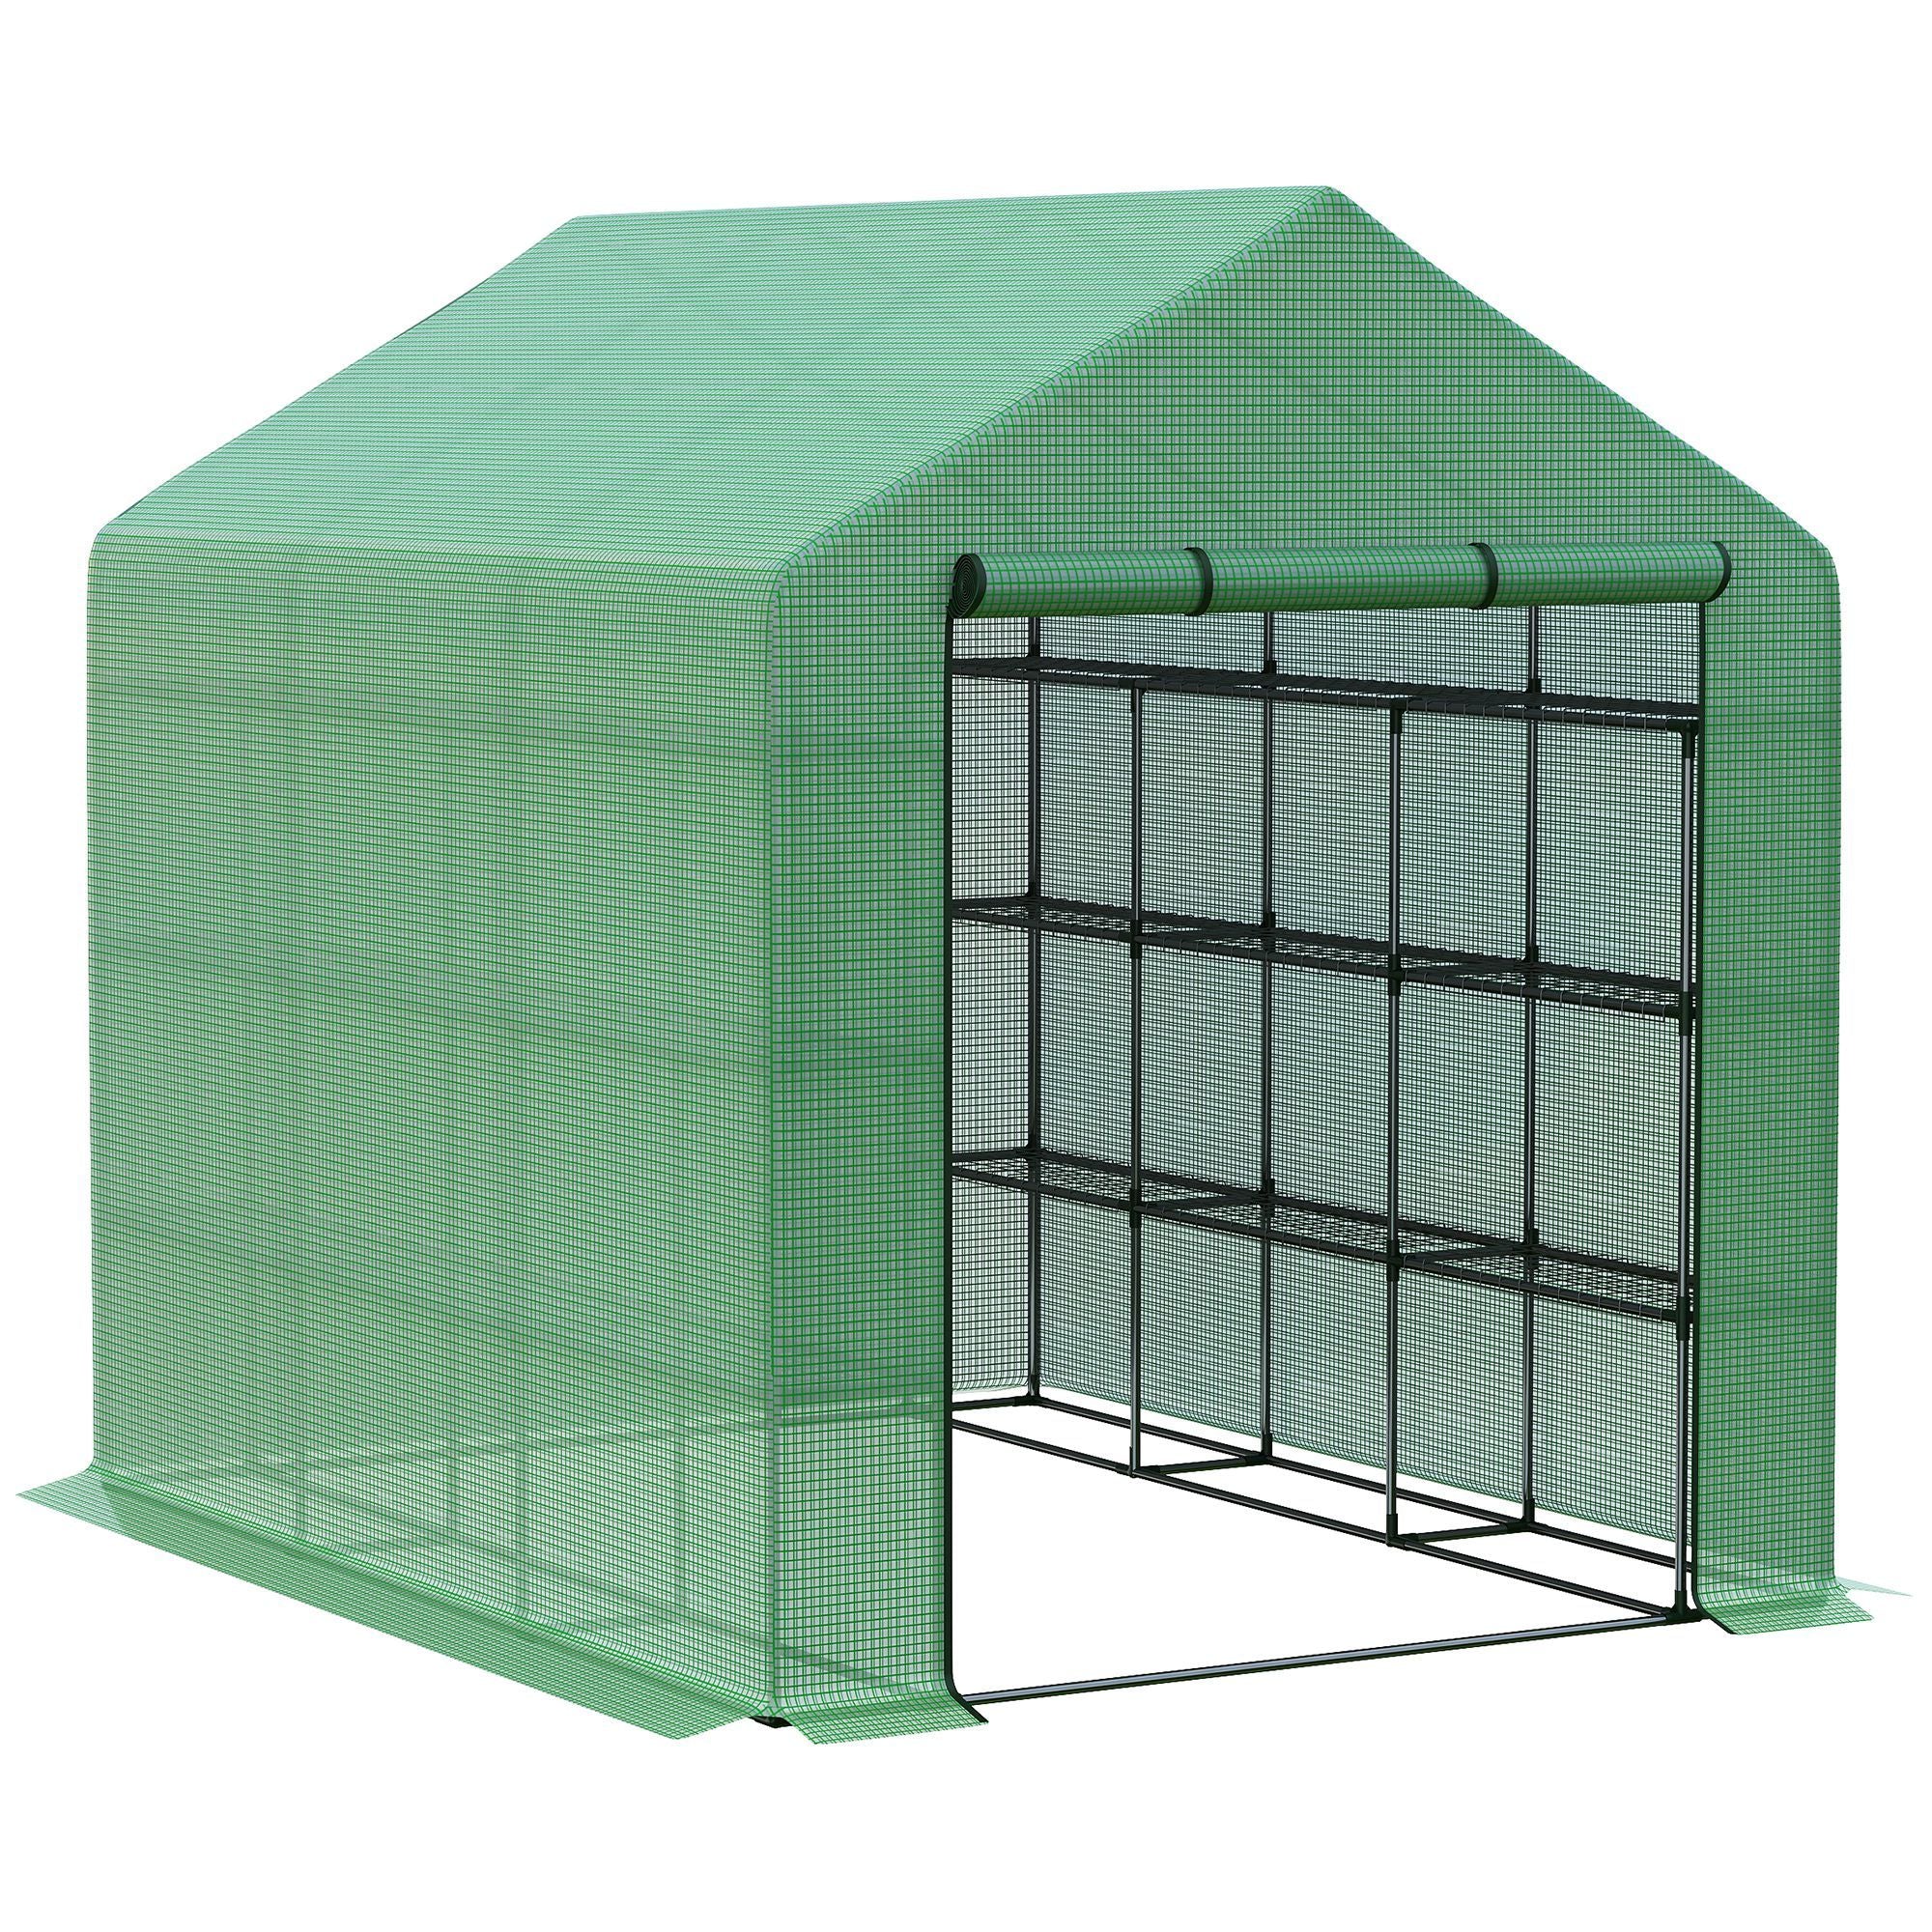 Walk in Greenhouse for Outdoors with Roll up